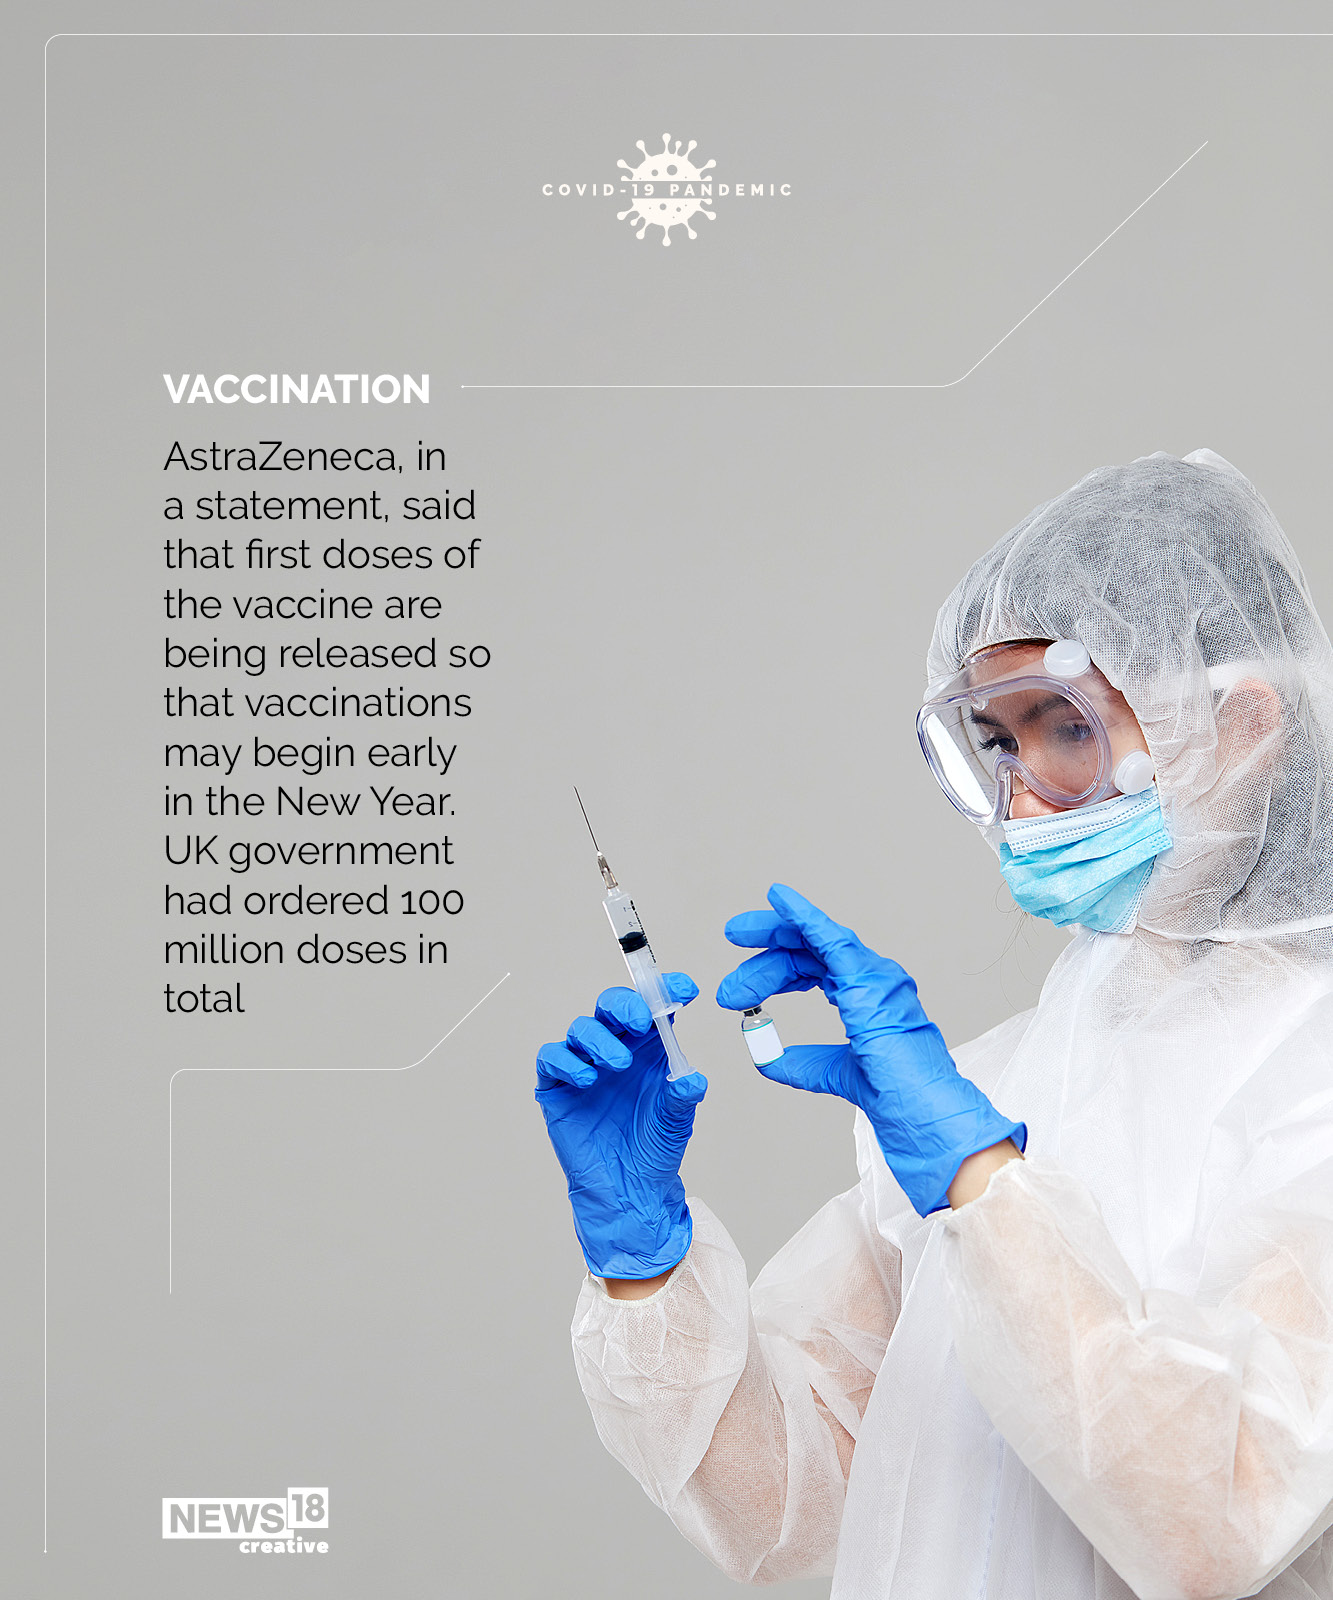 AstraZeneca vaccine: From development to efficacy, everything you need to know